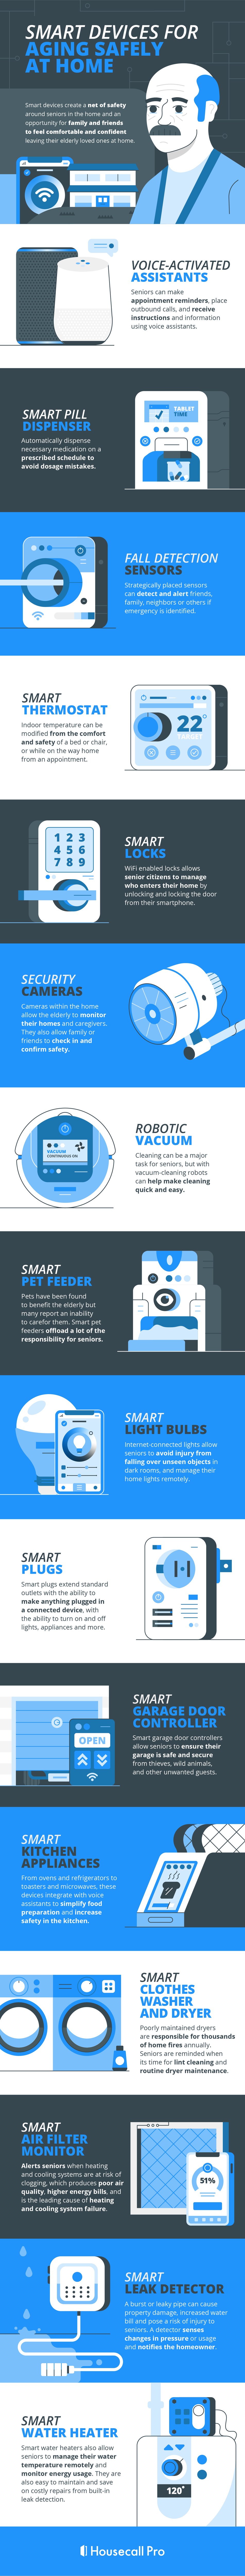 infographic about the smart devices for the elderly to use at home to increase their safety